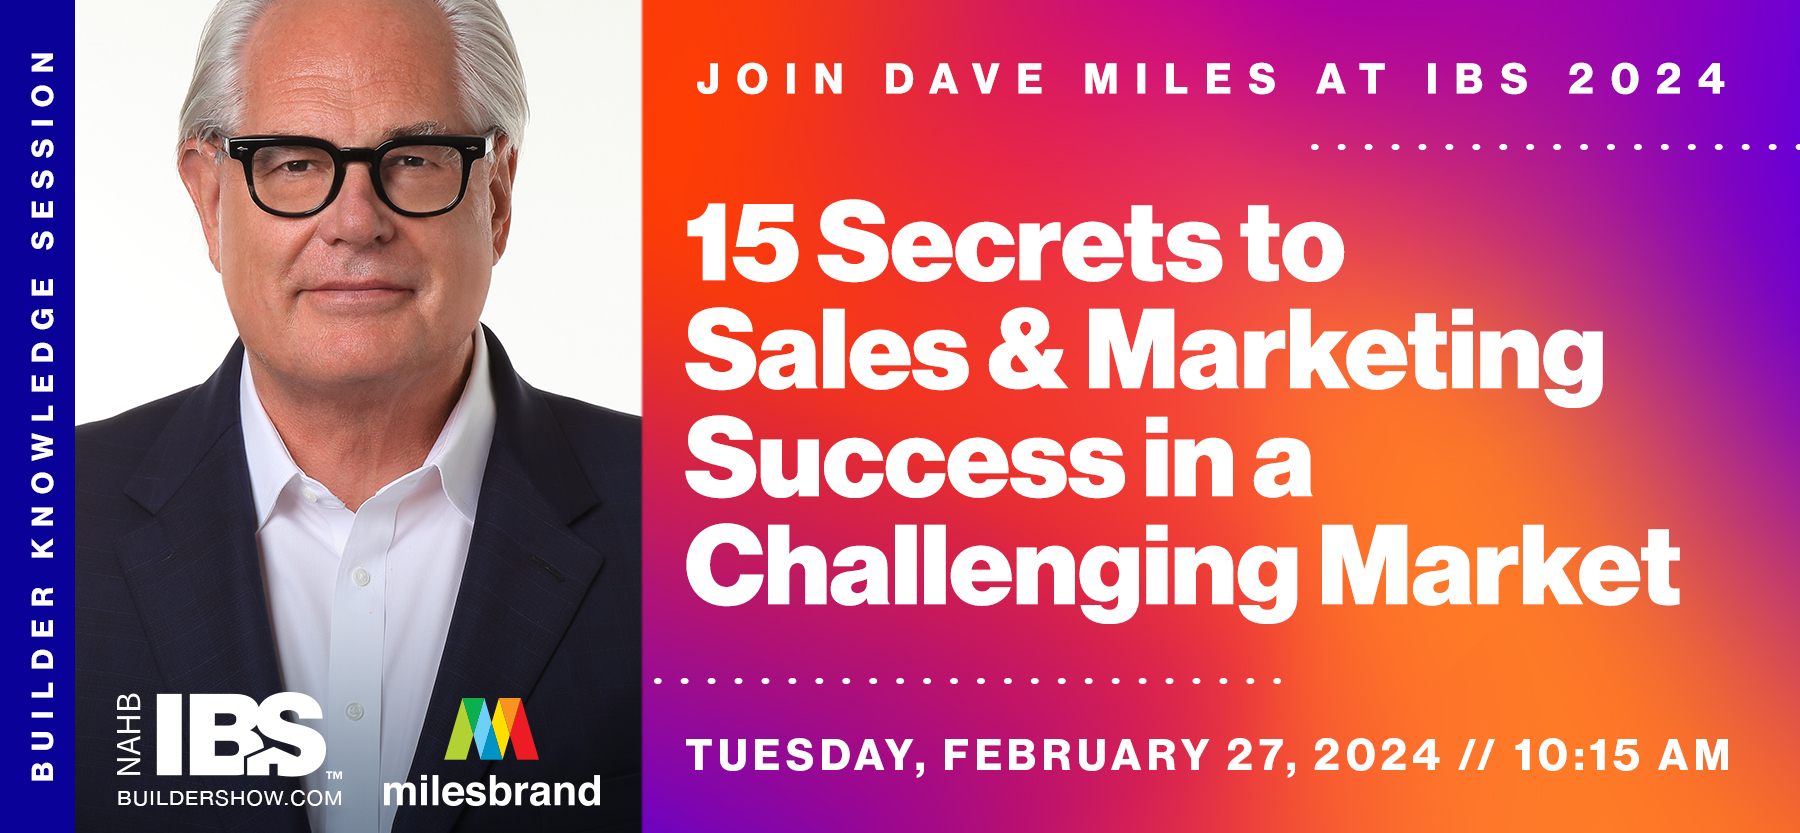 Join Milesbrand President Dave Miles at the 2024 NAHB International Builders’ Show for 15 Secrets to Sales and Marketing Success